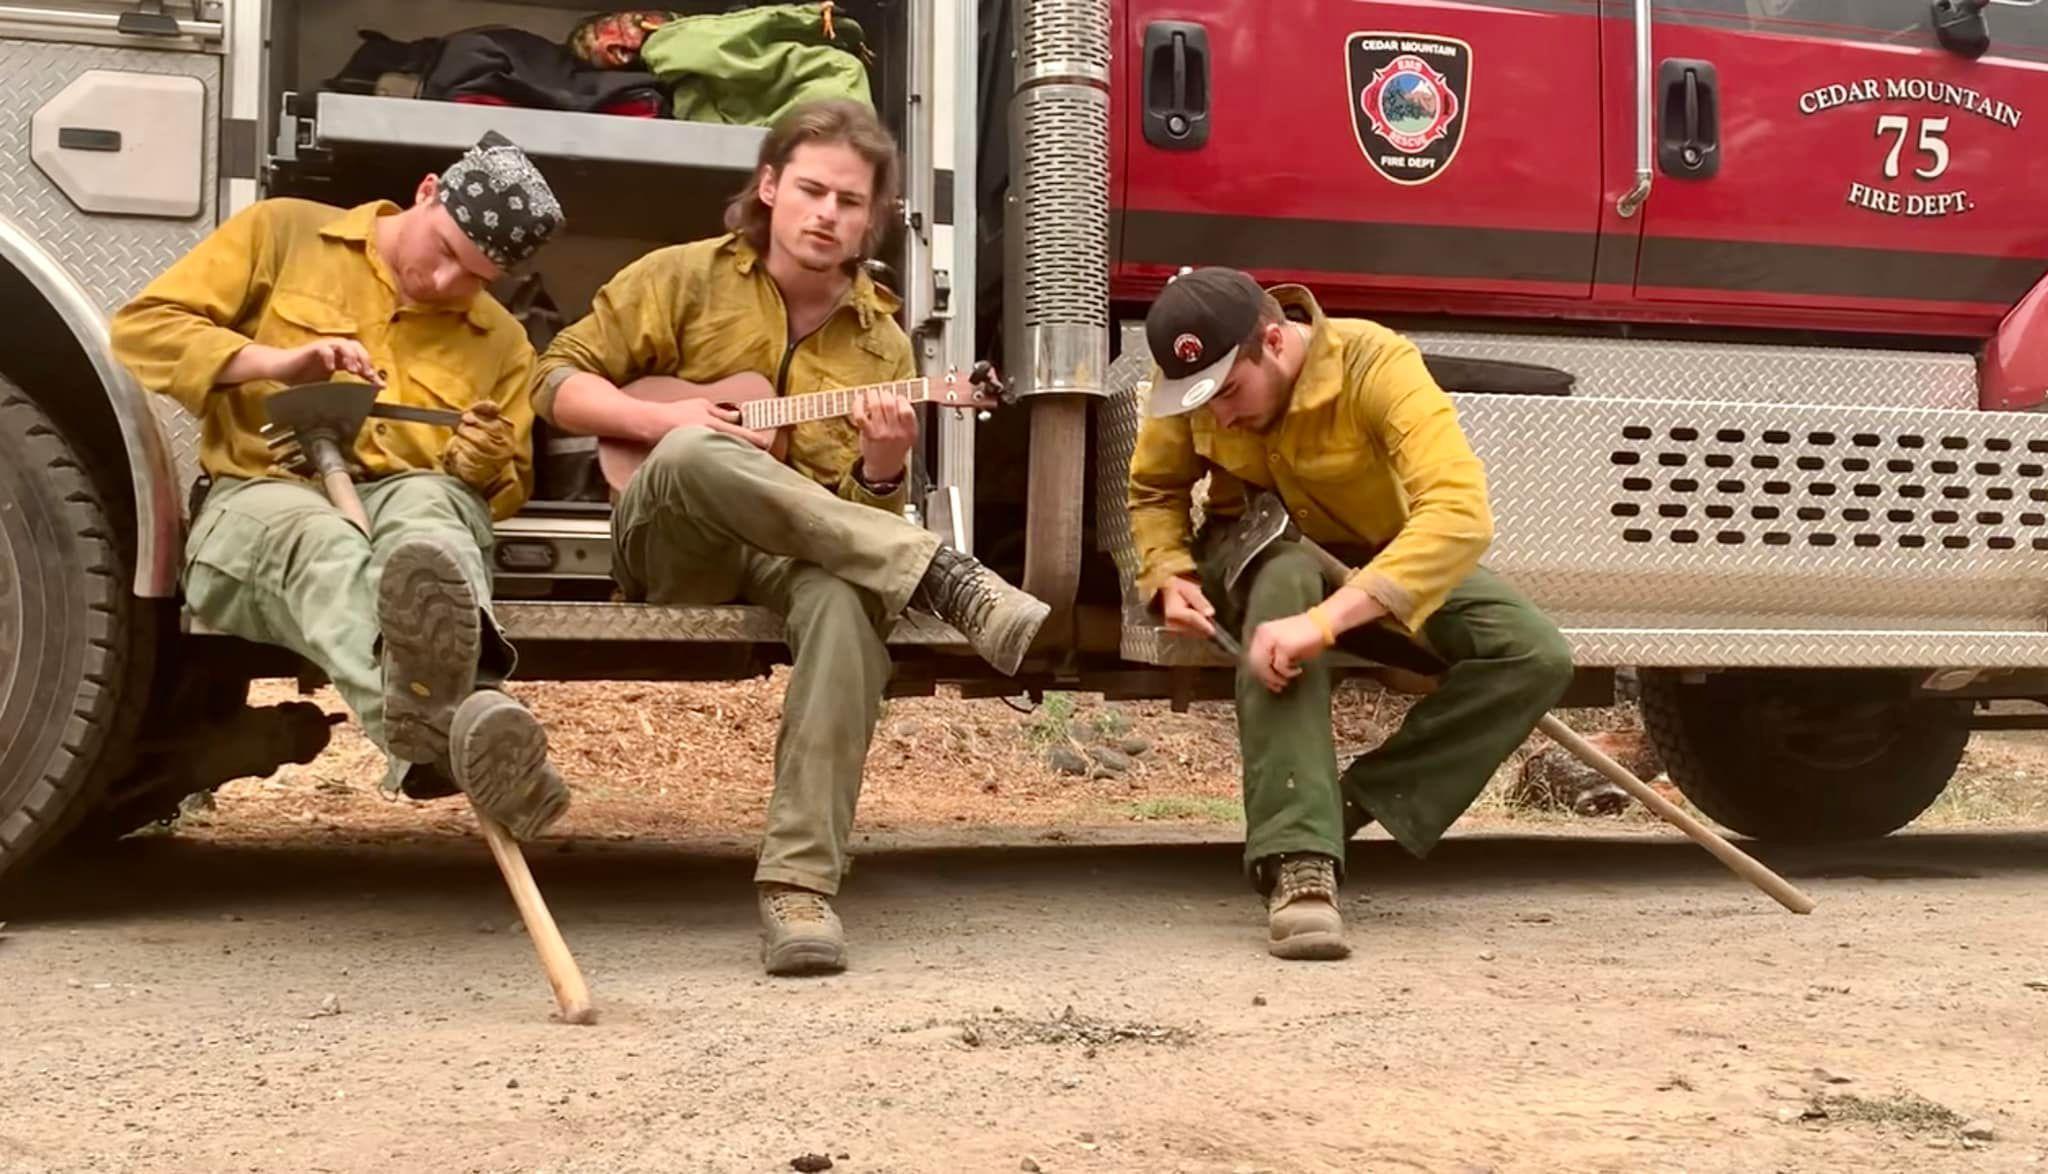 Crew sharpening hand tools on the fireline